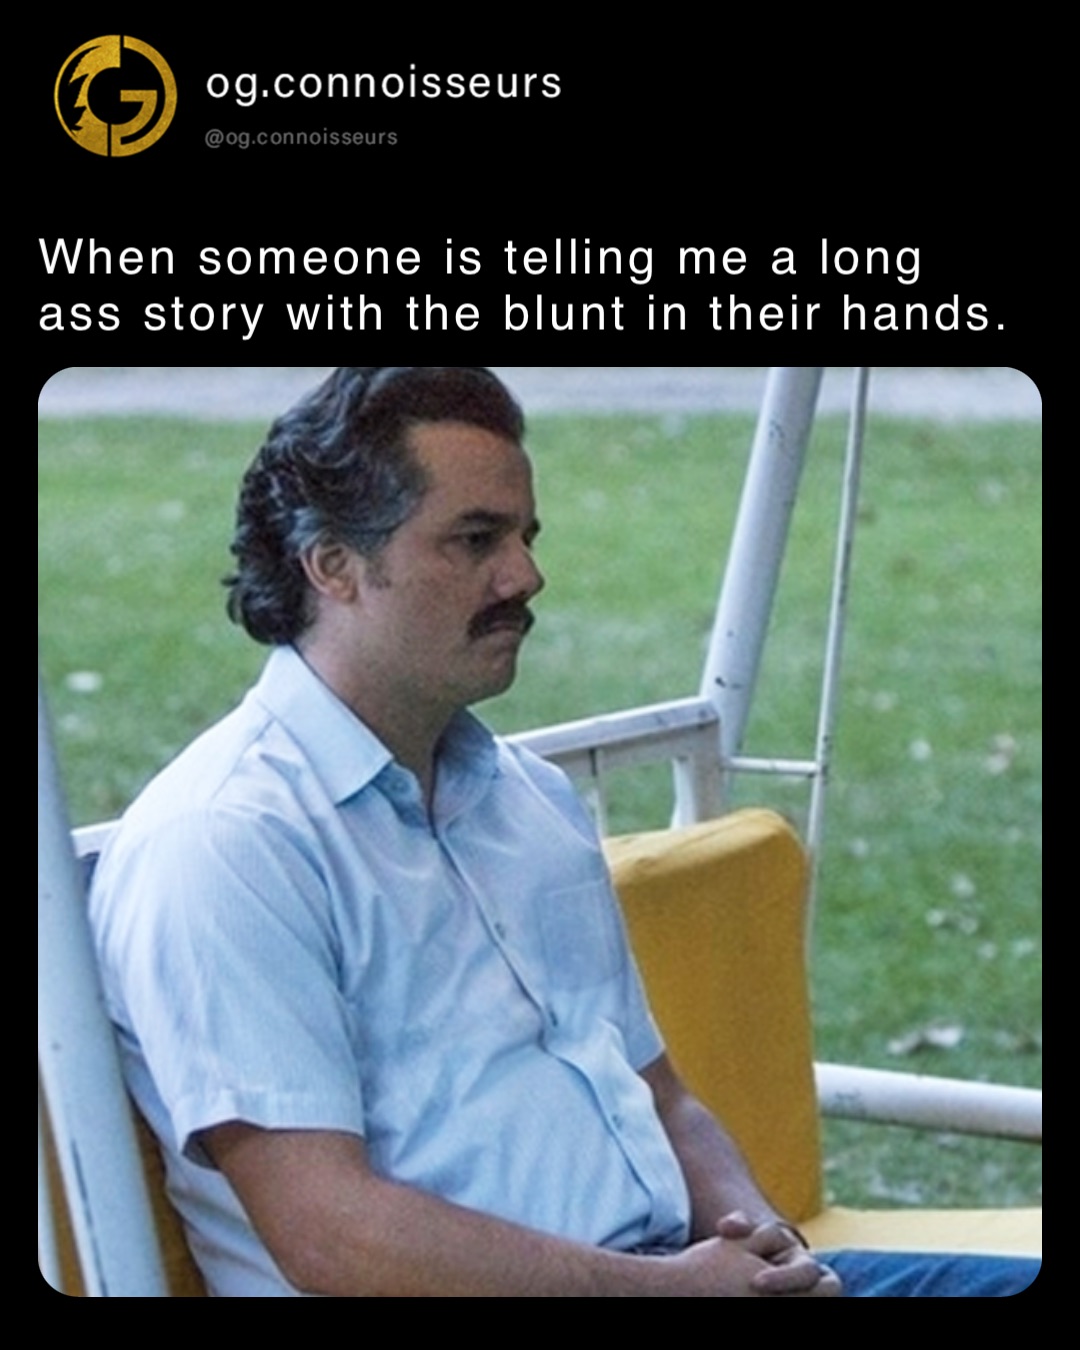 When someone is telling me a long ass story with the blunt in their hands.